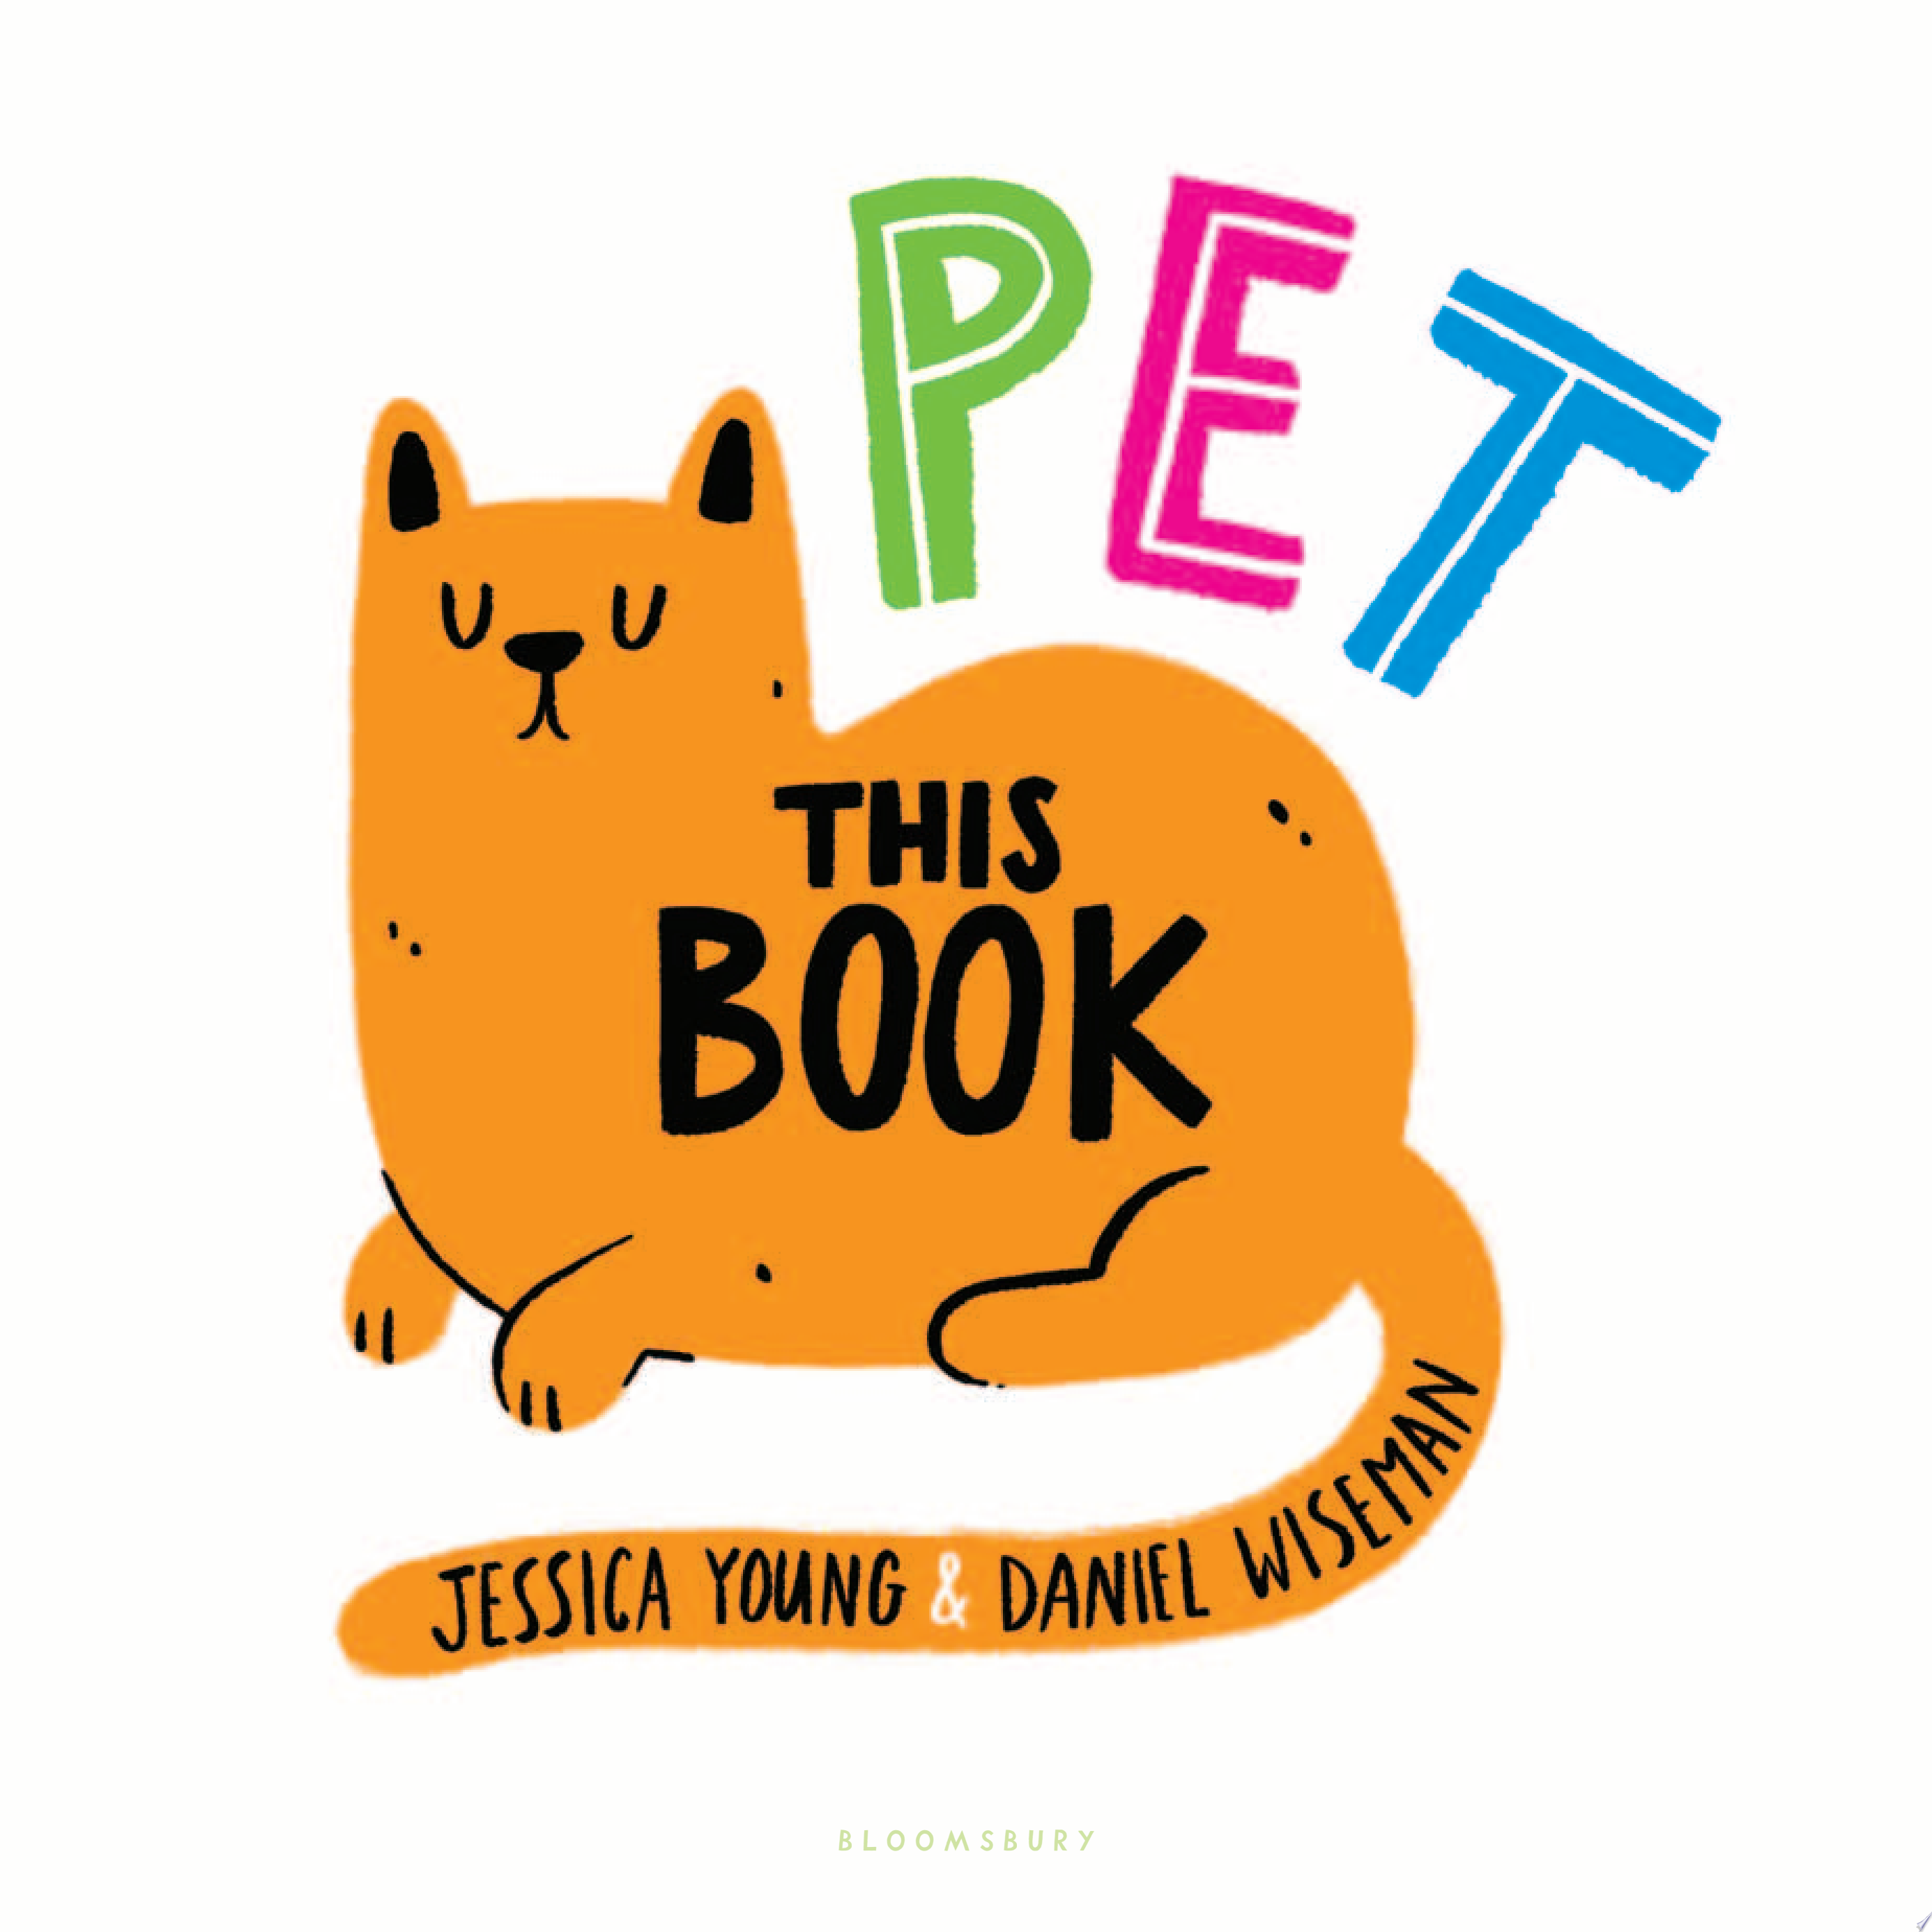 Image for "Pet This Book"